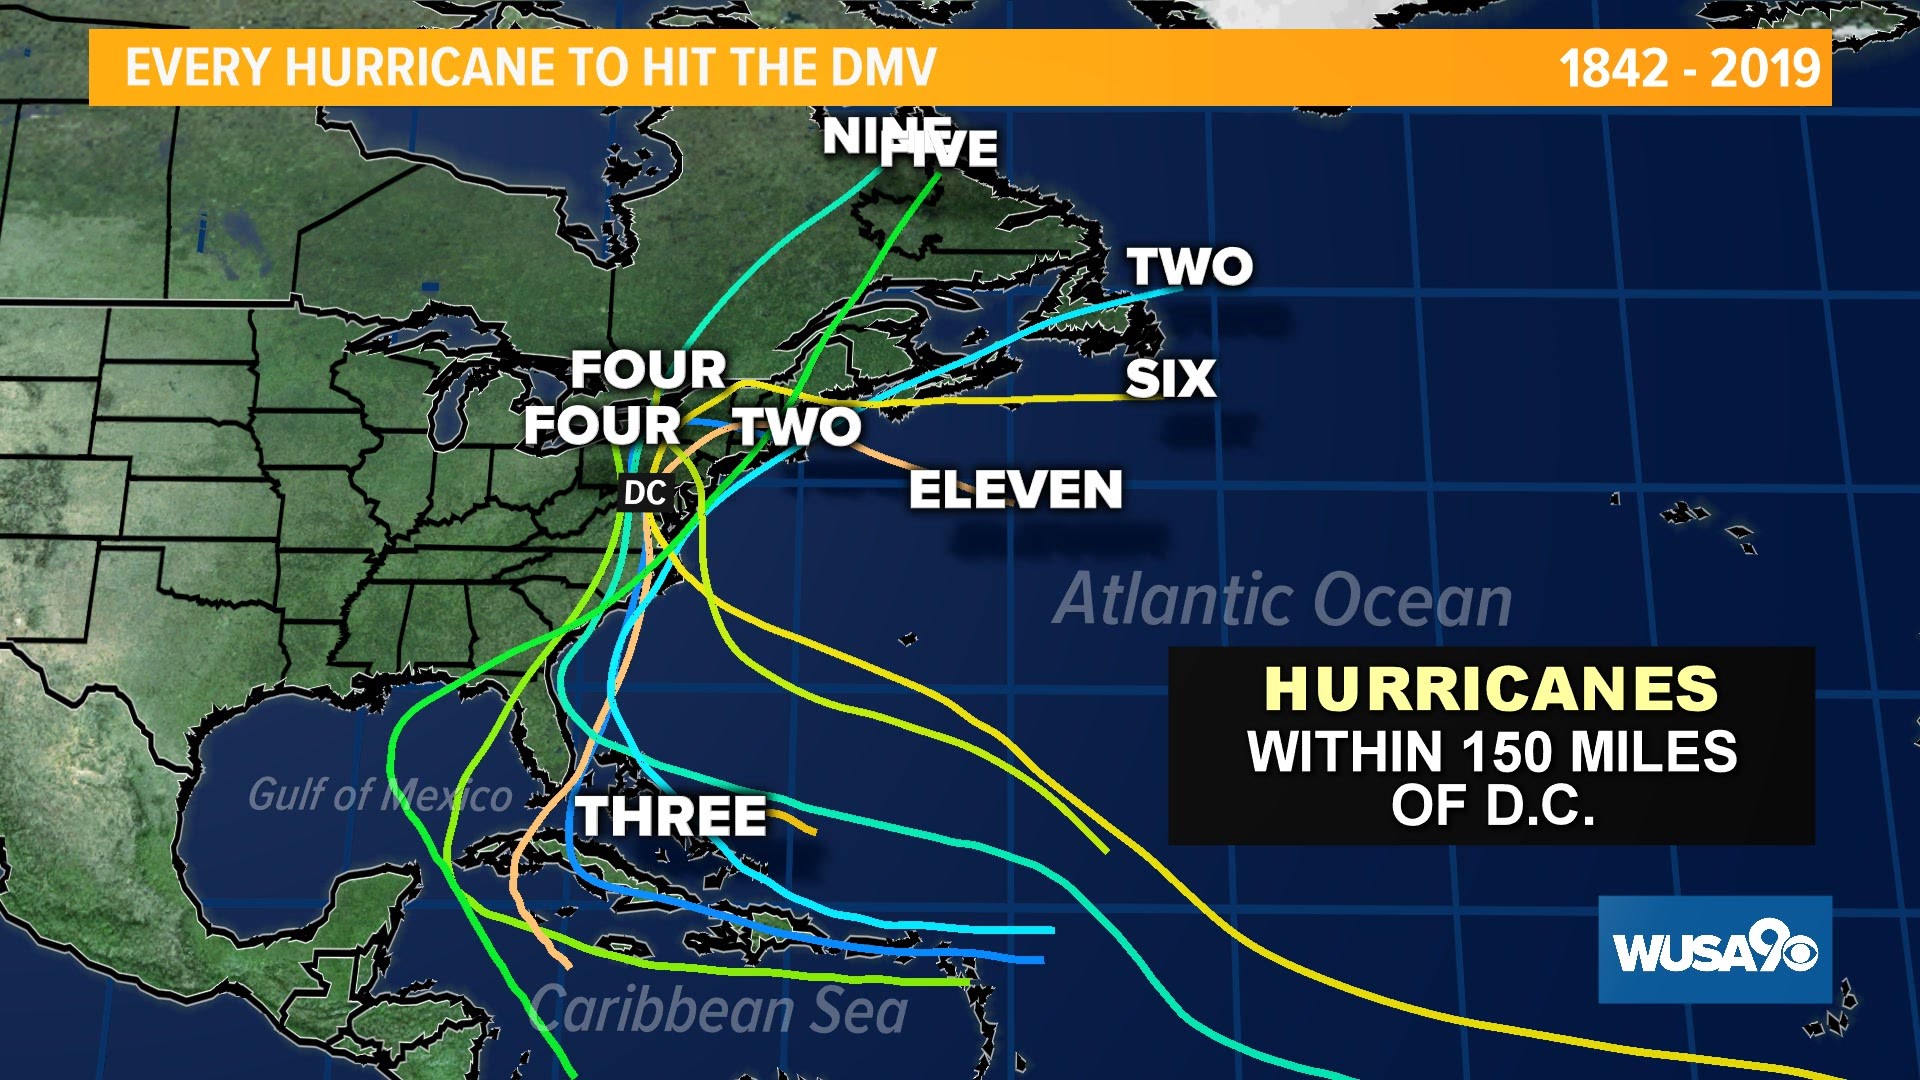 Every hurricane to hit within 150 miles of D.C.